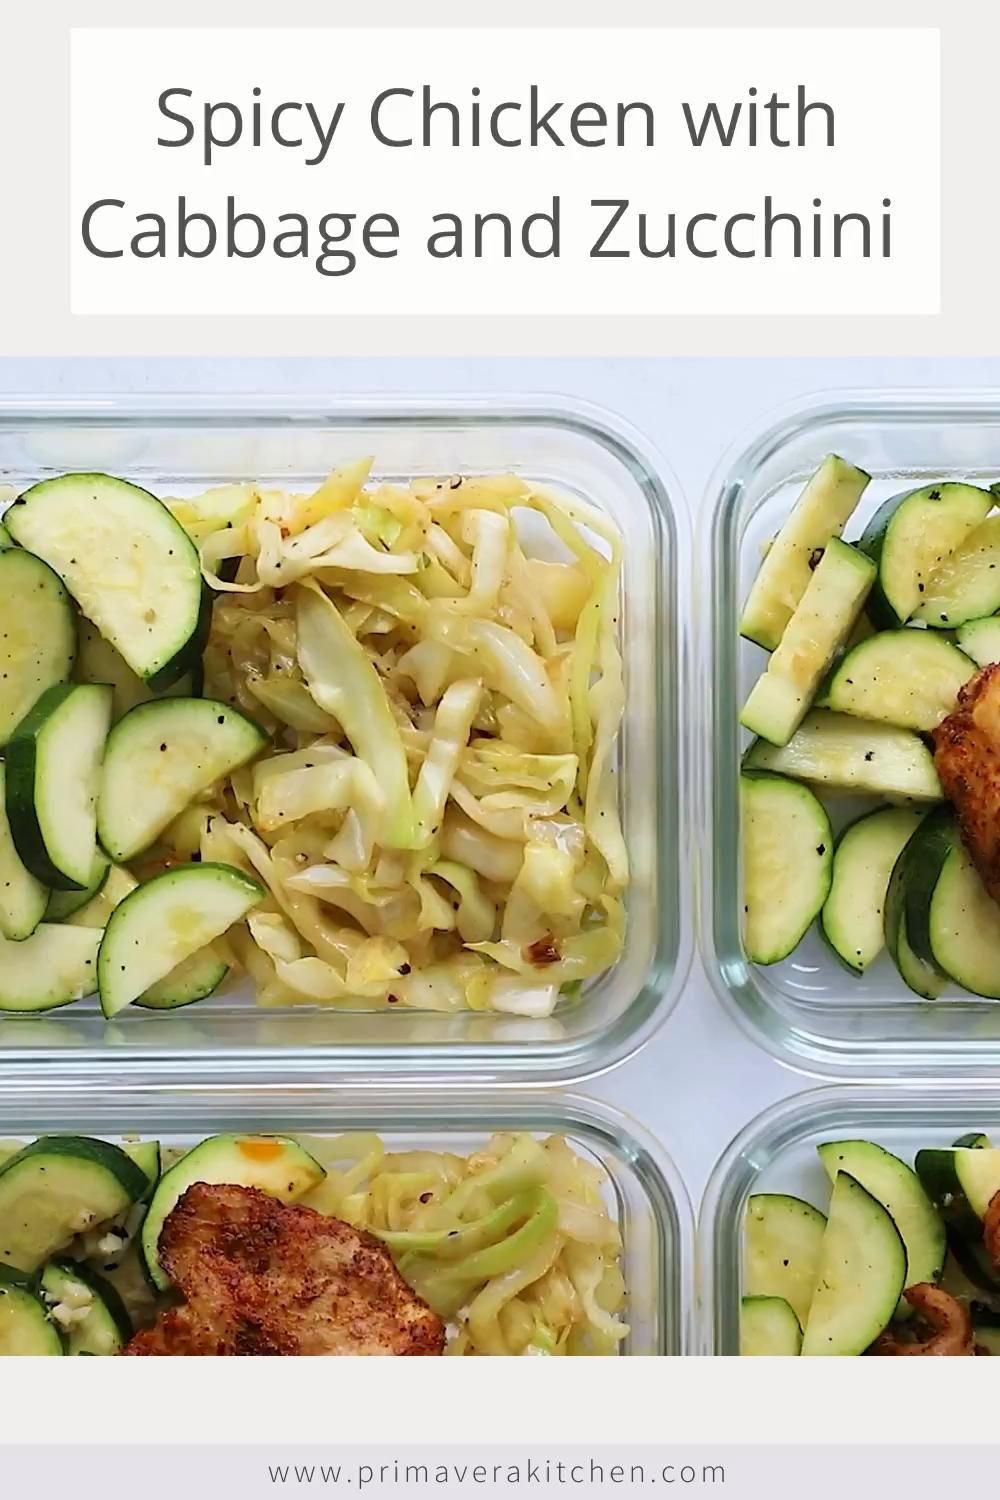 Spicy Chicken with Sauteed Cabbage and Zucchini Bowls -   18 meal prep recipes for beginners ideas